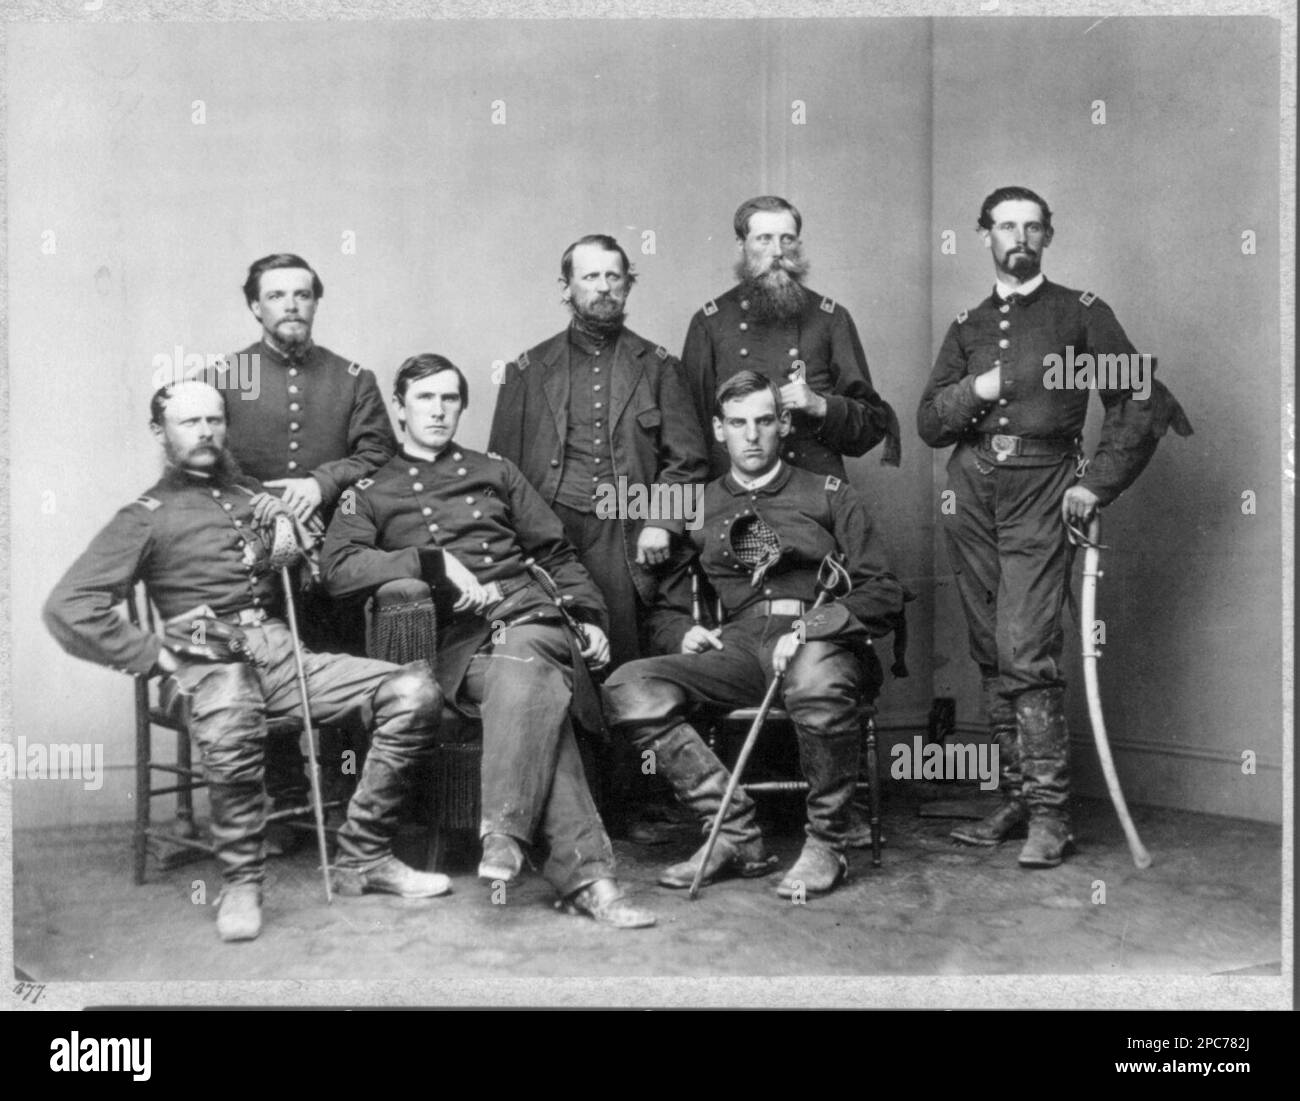 Bvt. Brigadier General C. D. McDougall i.e. MacDougall and staff. No. B77, Title from item, Gift; Col. Godwin Ordway; 1948. MacDougall, Clinton Dugald, 1839-1914, United States, History, Civil War, 1861-1865. Stock Photo